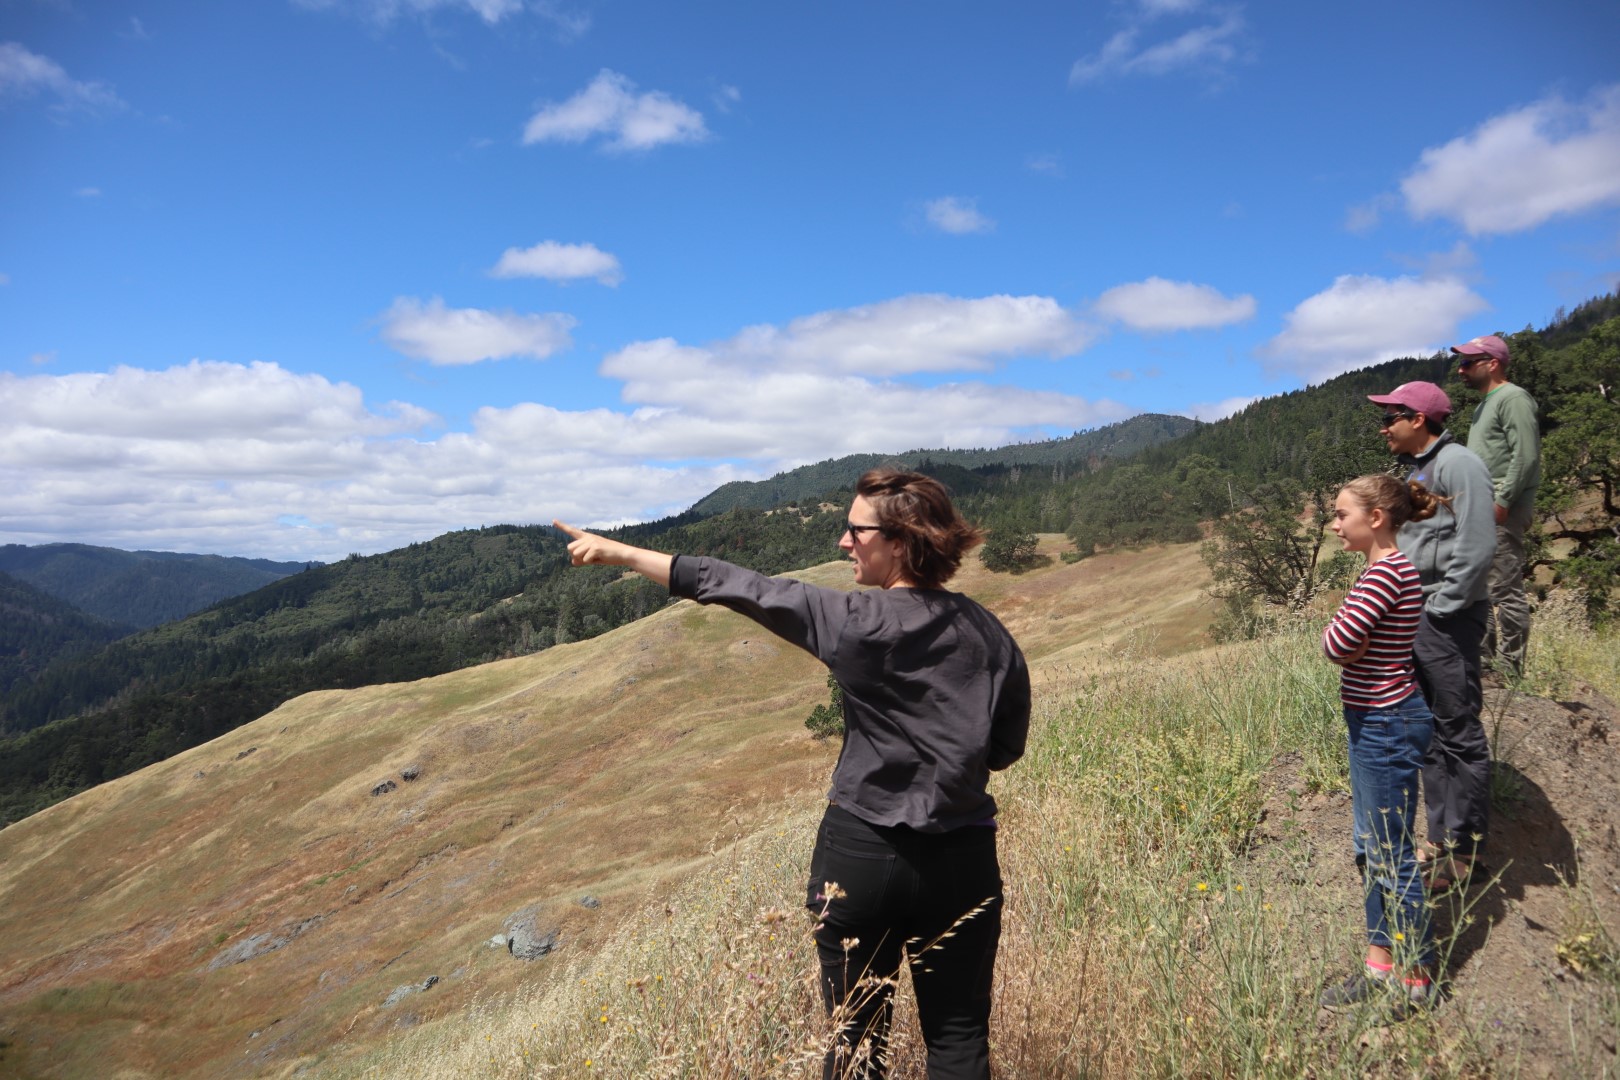 MLT's Director of Stewardship Points out over a beautiful grass covered hillside towards forested mountains along the Eel River